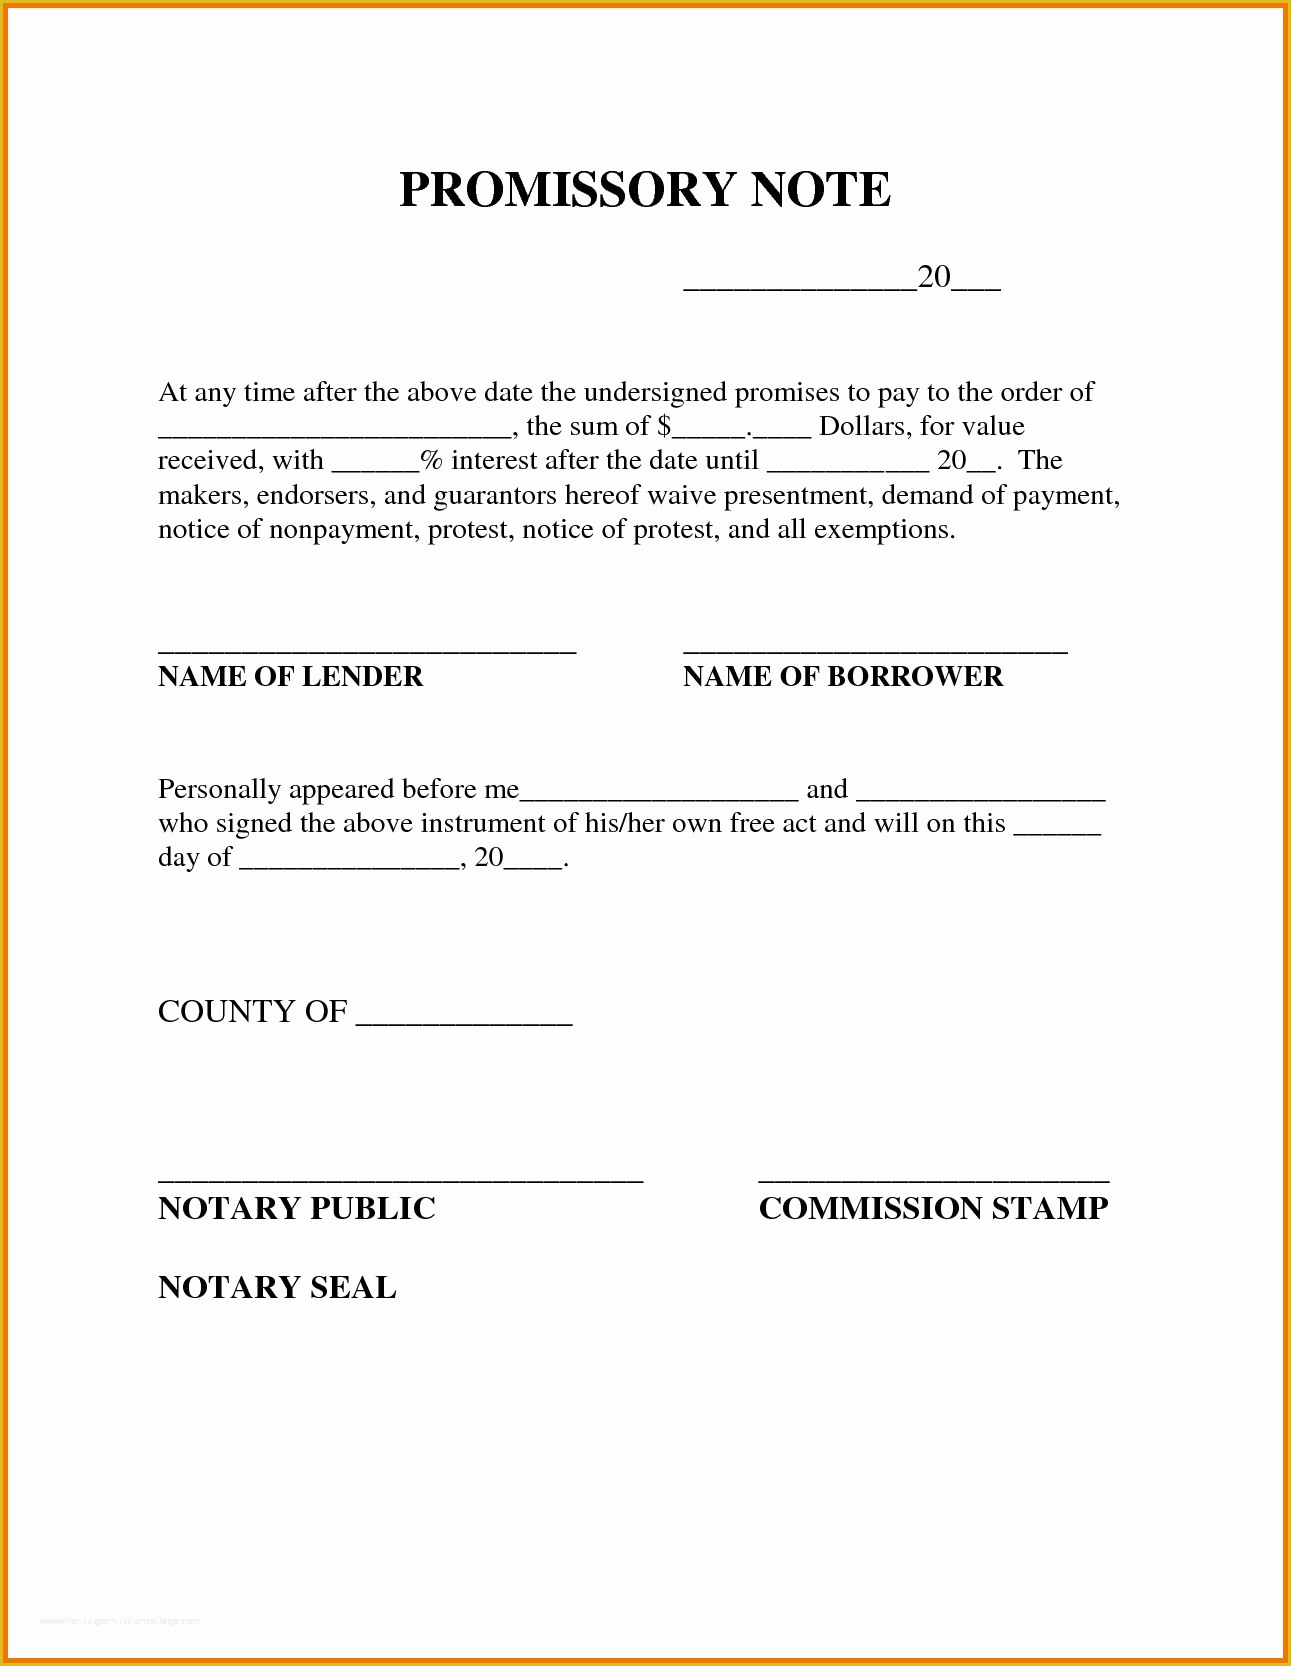 Free Promissory Note Template Of Promissory Note Template From Borrower to Lender Vatansun